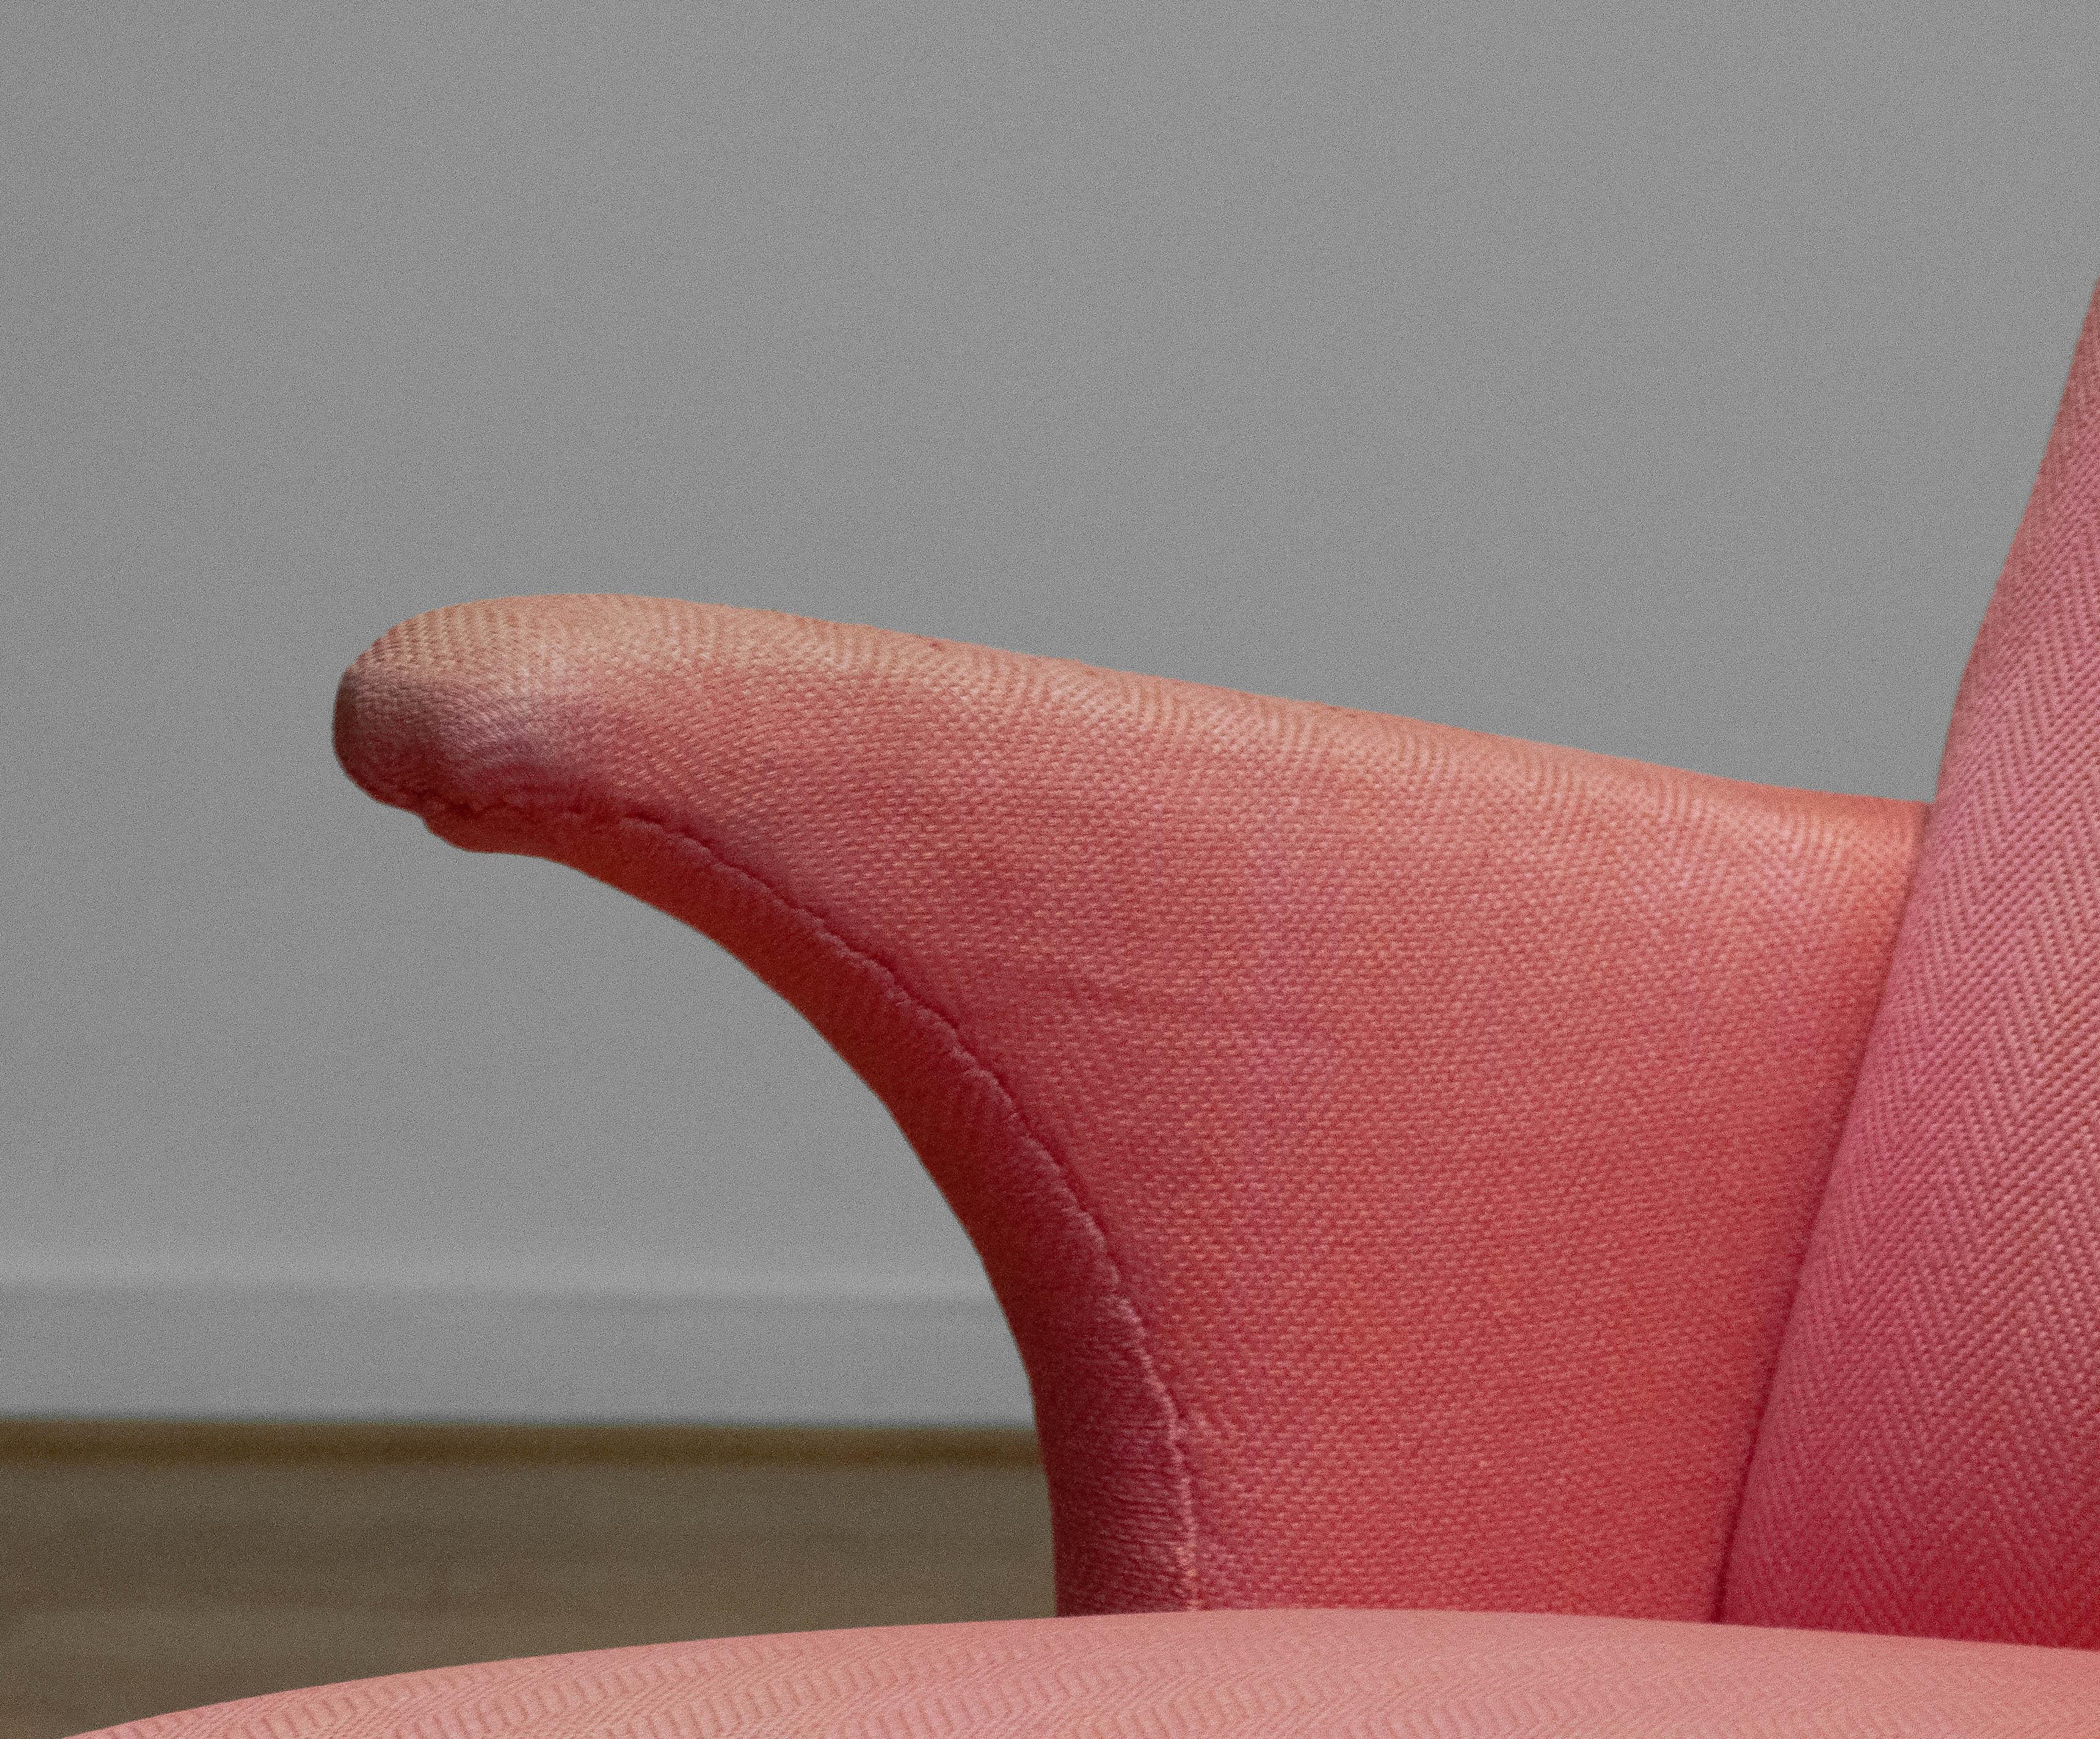 1950 Armchair / Lounge Chair With Powder Pink Wool Upholstery By Dux From Sweden For Sale 6